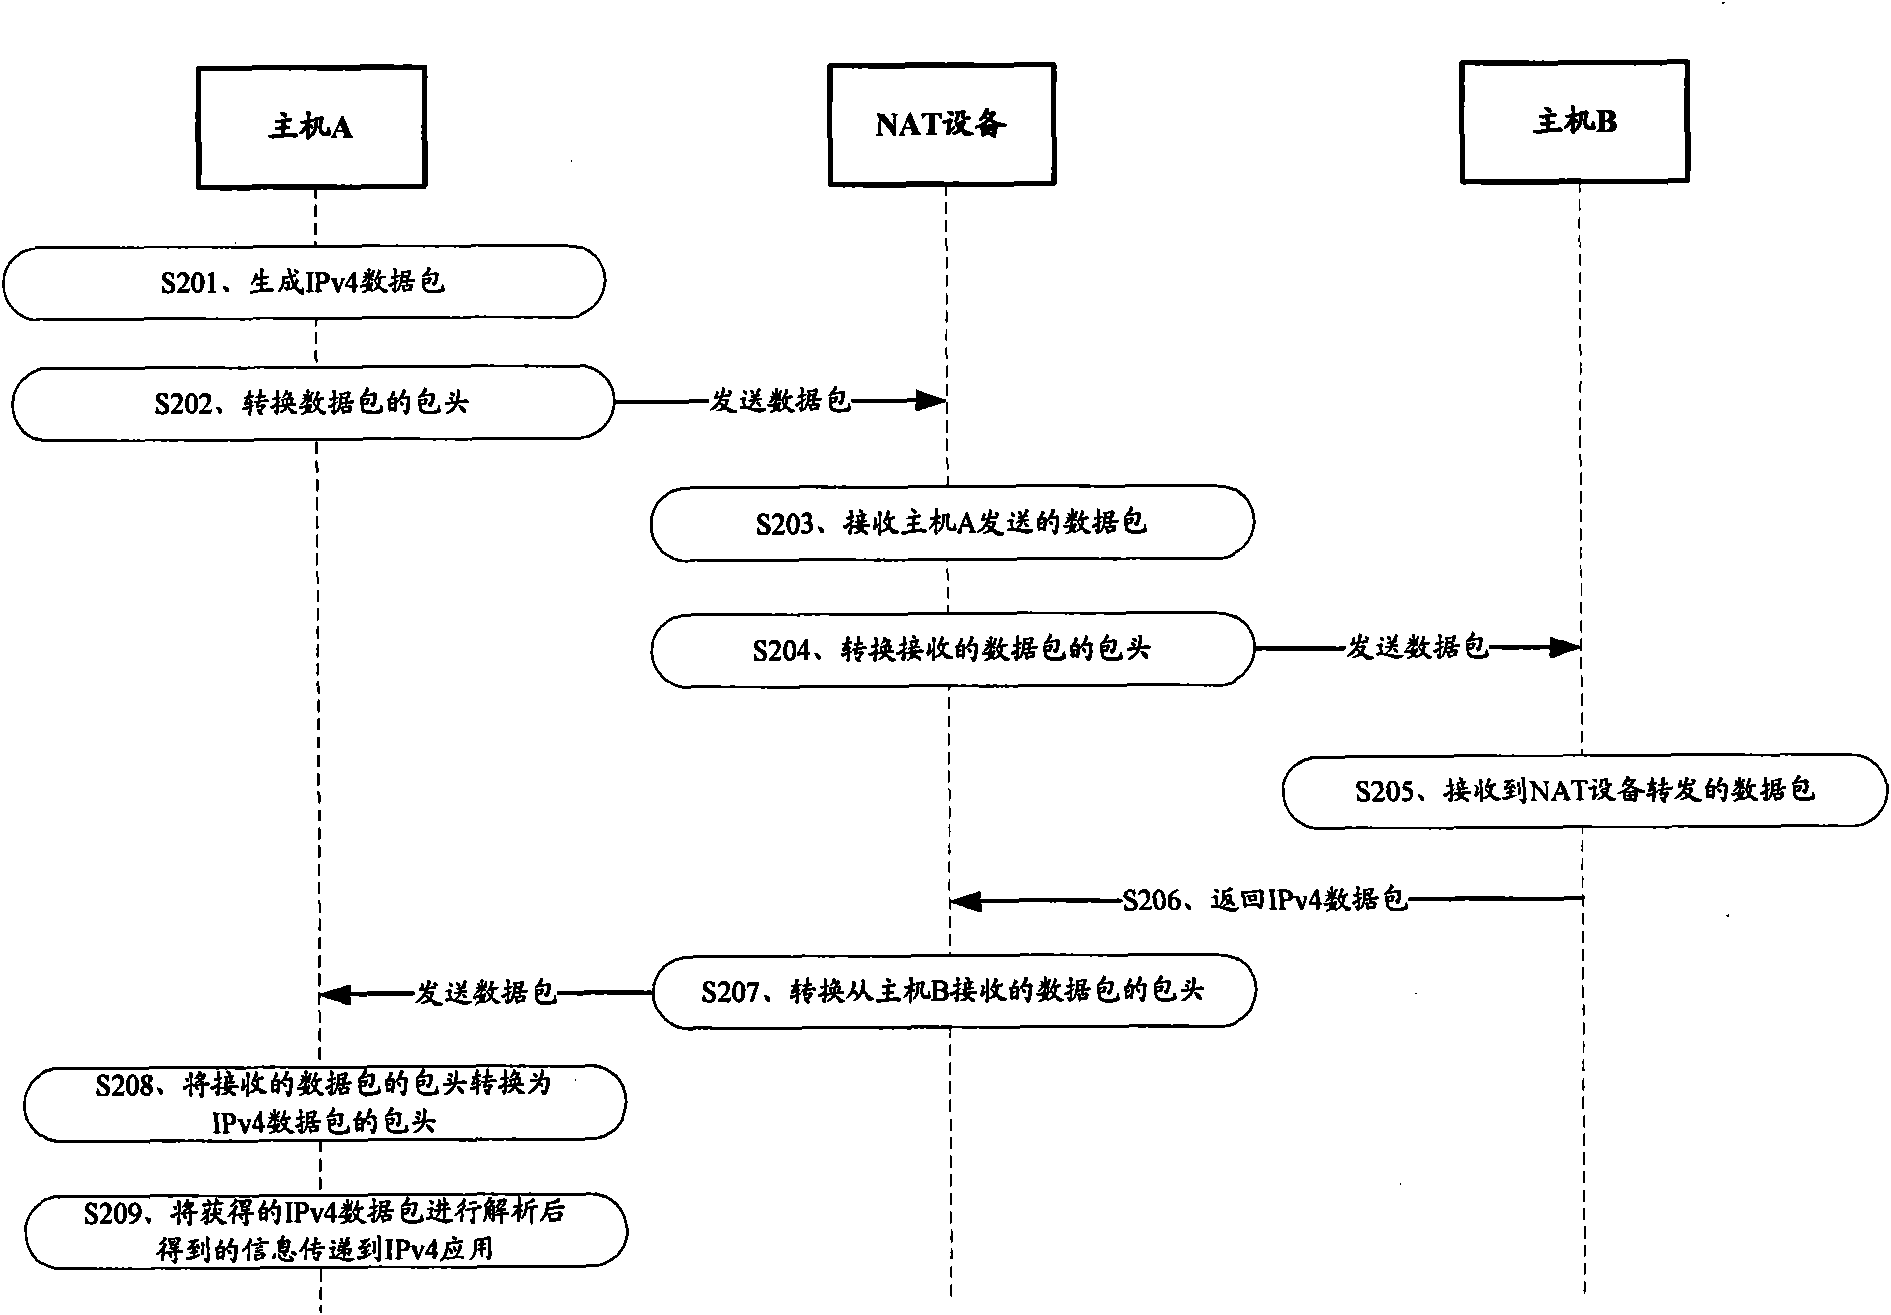 Method and system for host computer with IPv4 application to communicate through IPv6 network